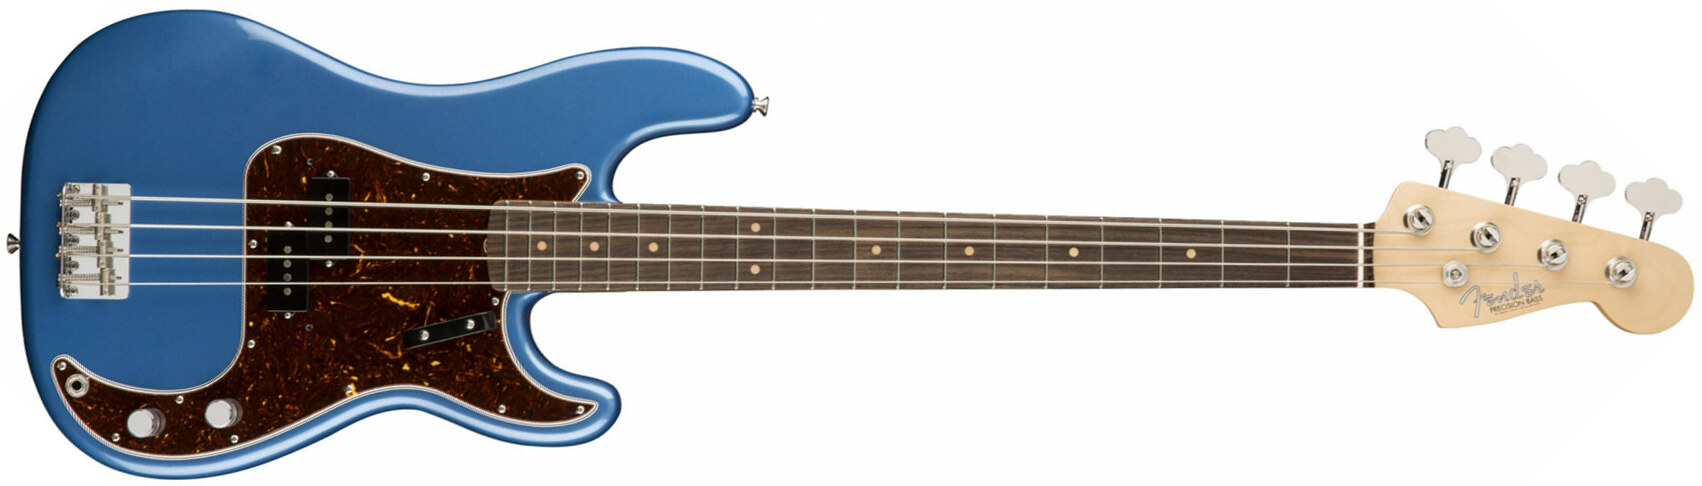 Fender Precision Bass '60s American Original Usa Rw - Lake Placid Blue - Solid body electric bass - Main picture